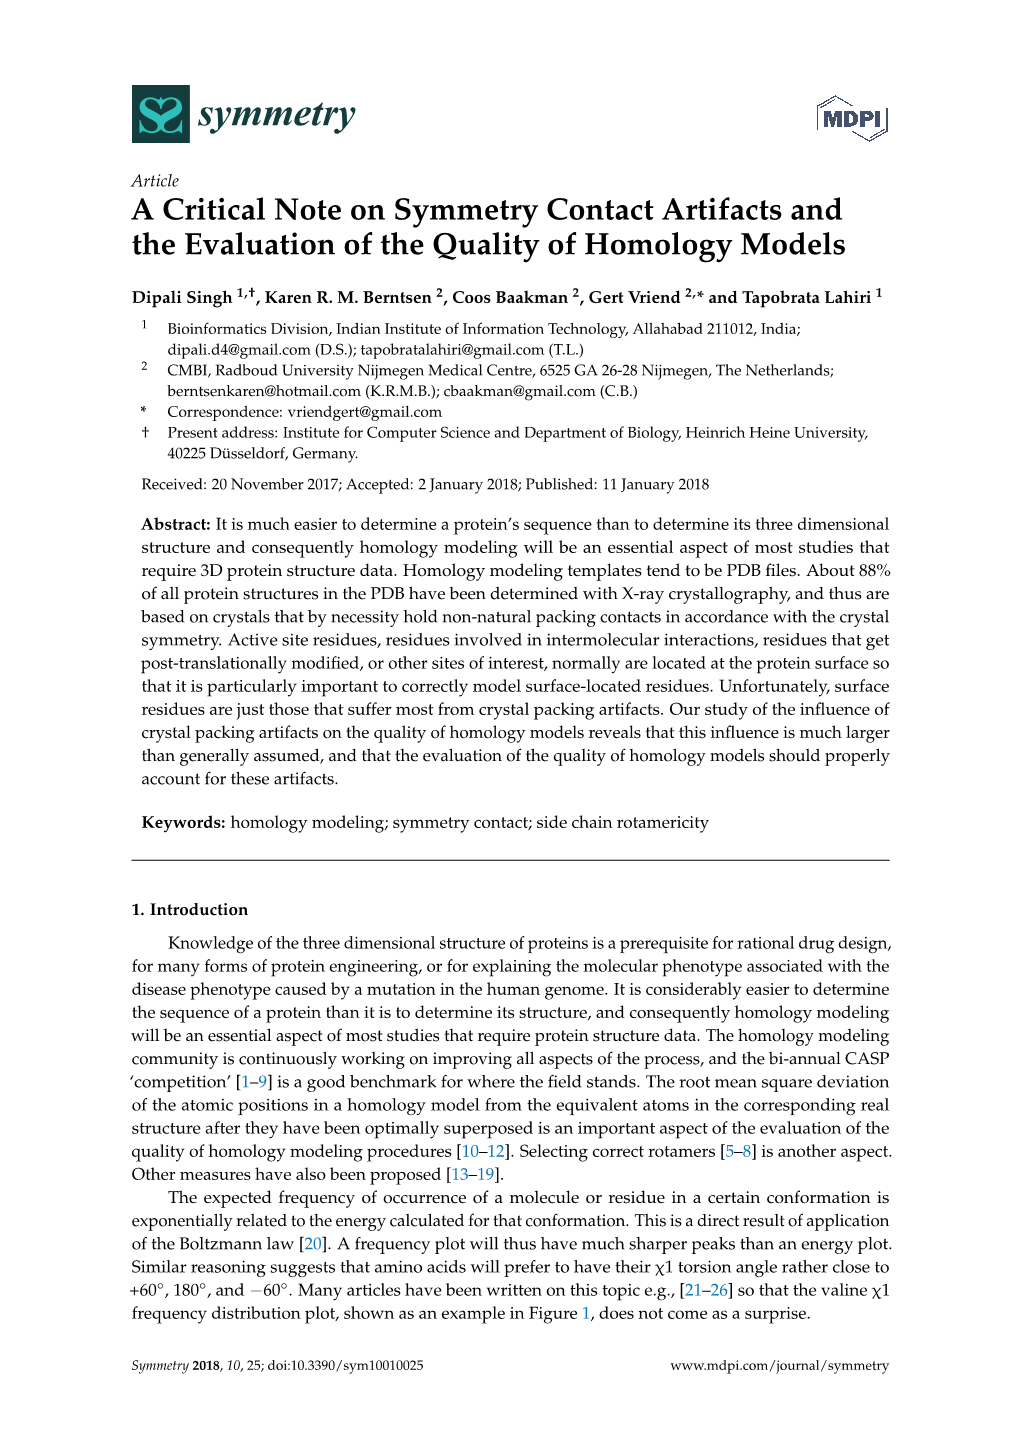 A Critical Note on Symmetry Contact Artifacts and the Evaluation of the Quality of Homology Models